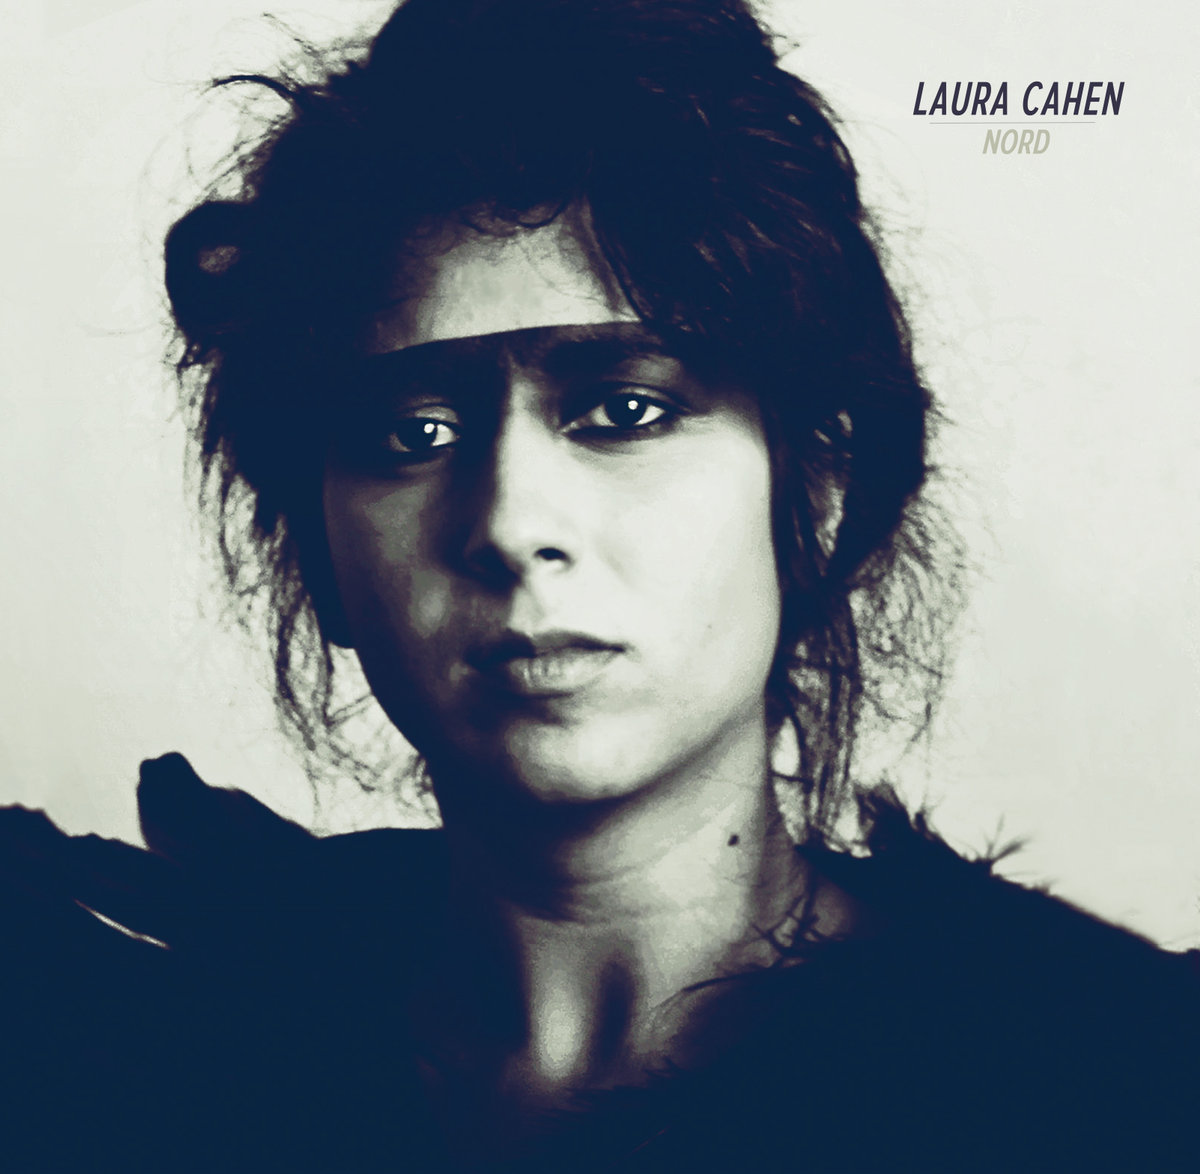 Laura Cahen Nord